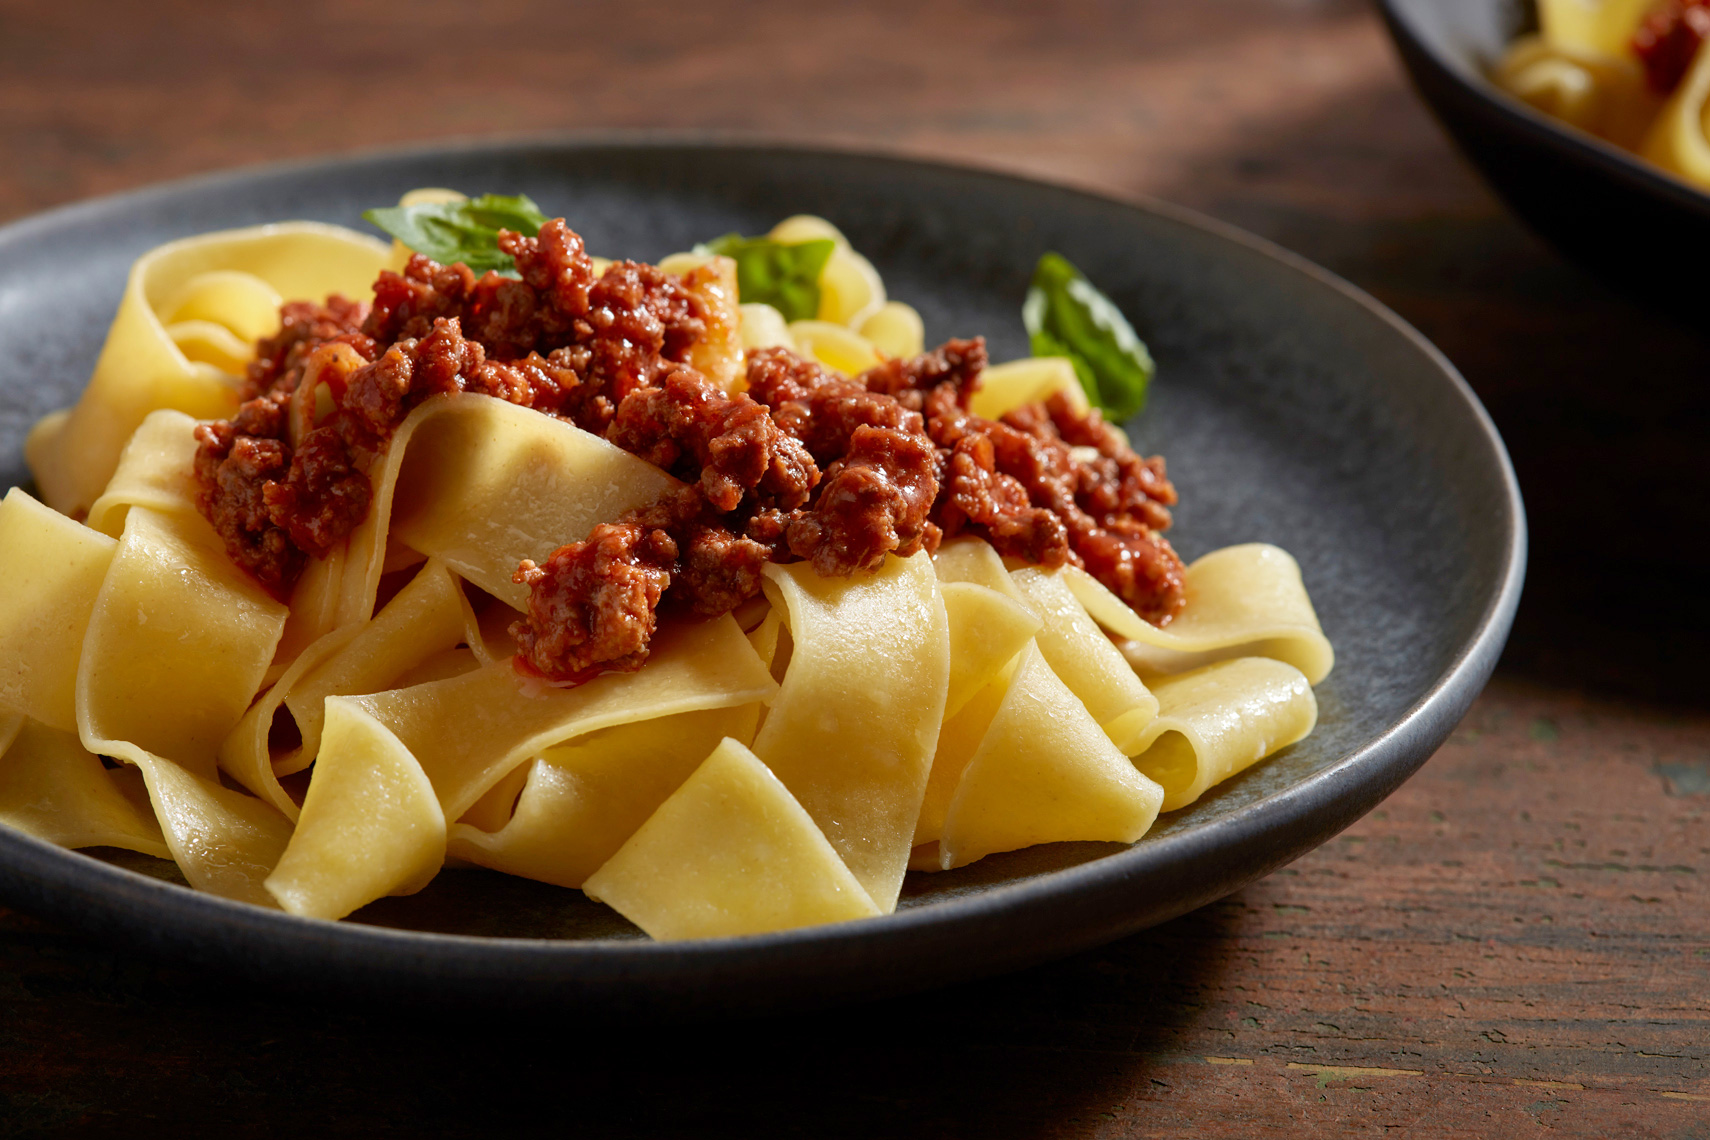 Marx_Photography_Food_Pasta_Bolognese